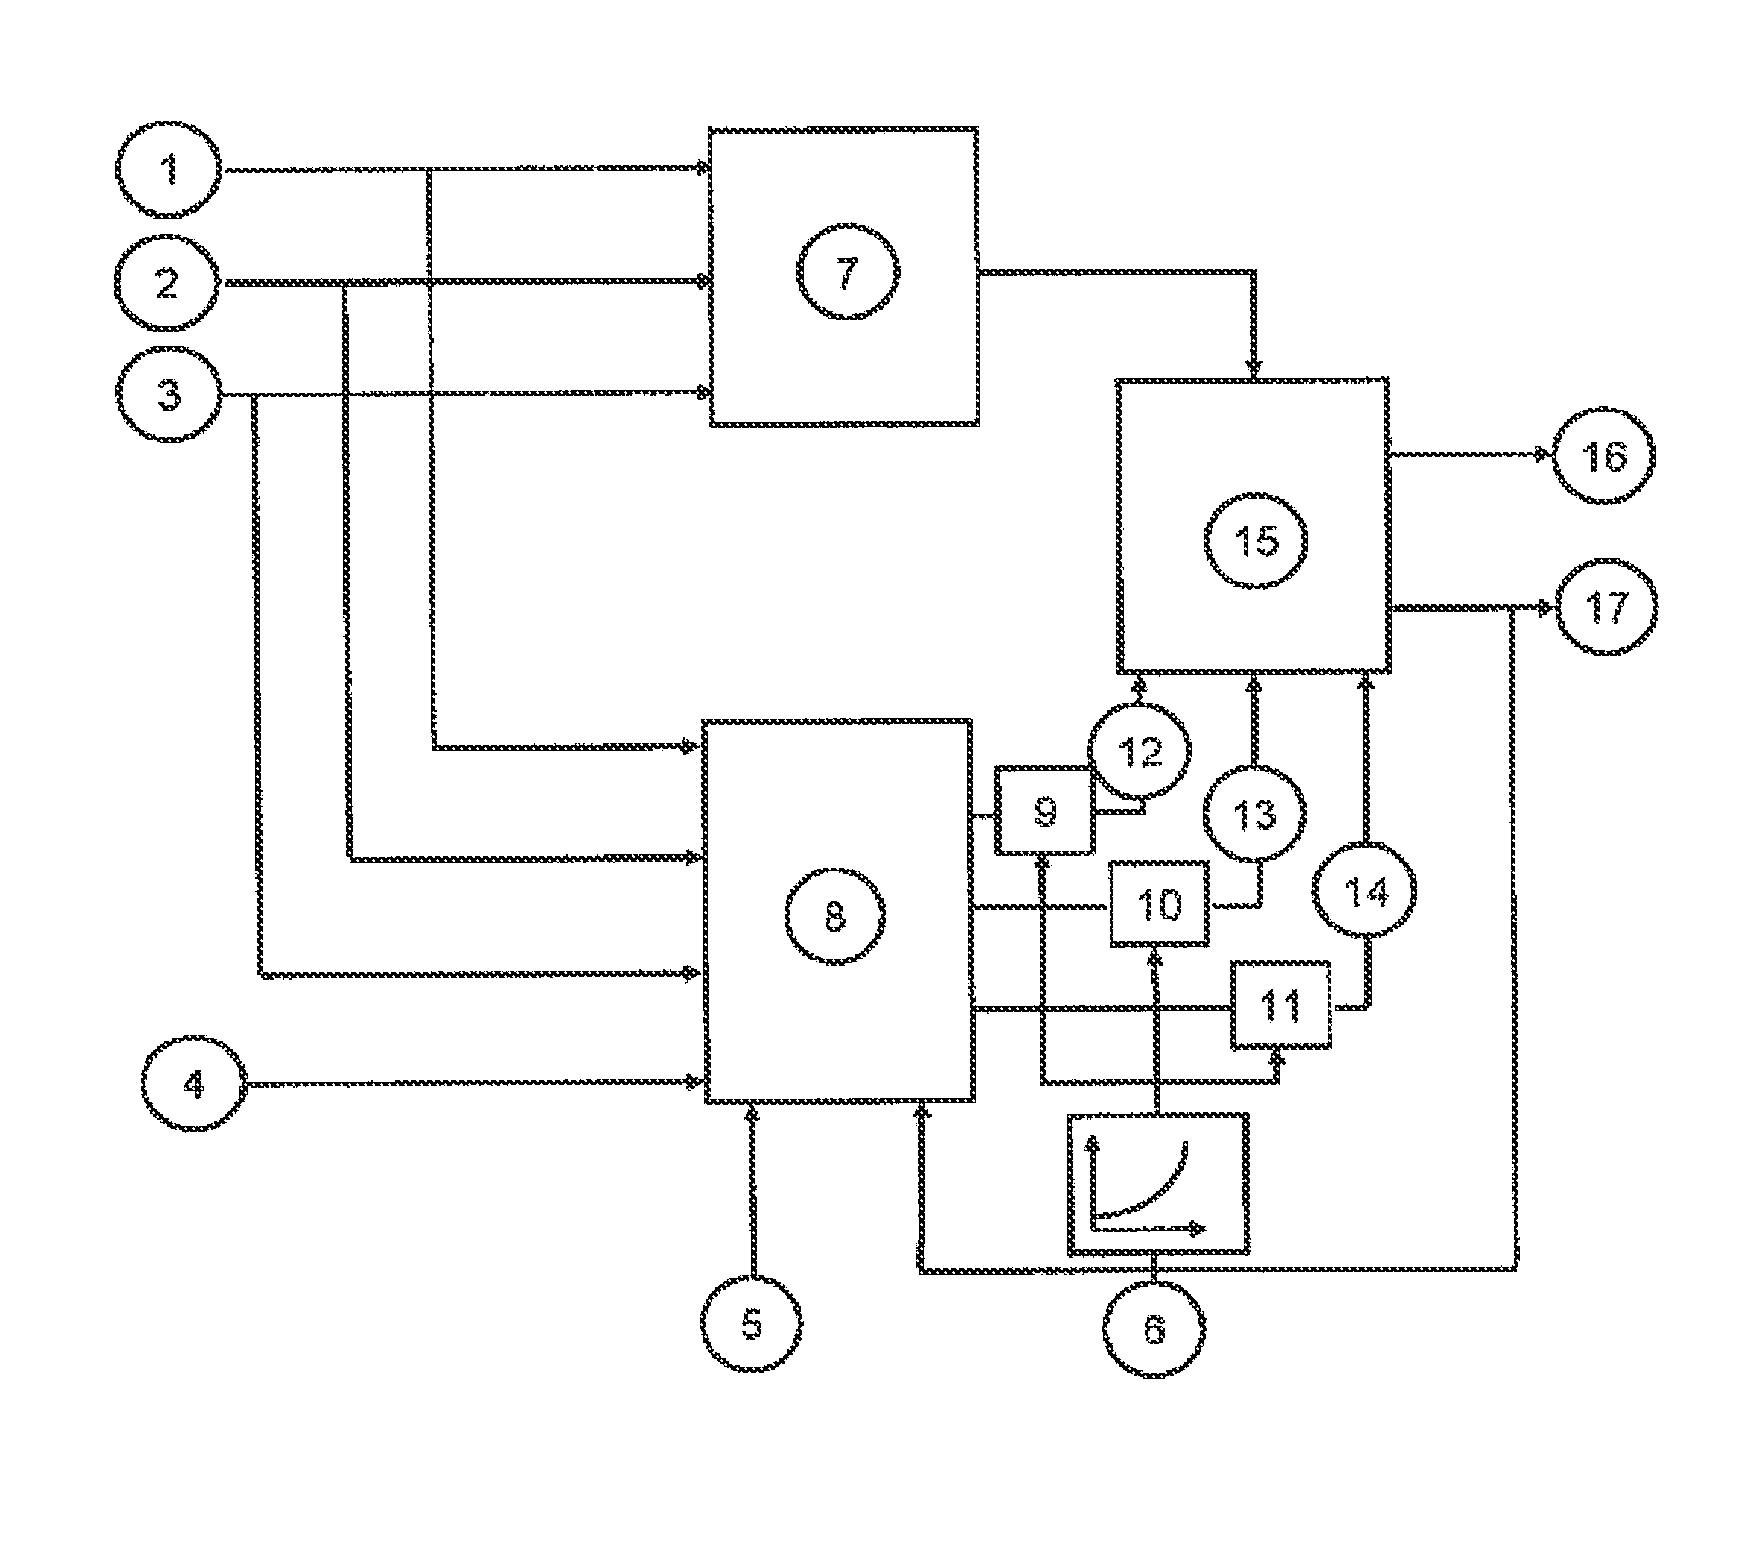 Method for controlling an automated clutch or automated transmission or a drive unit in a vehicle